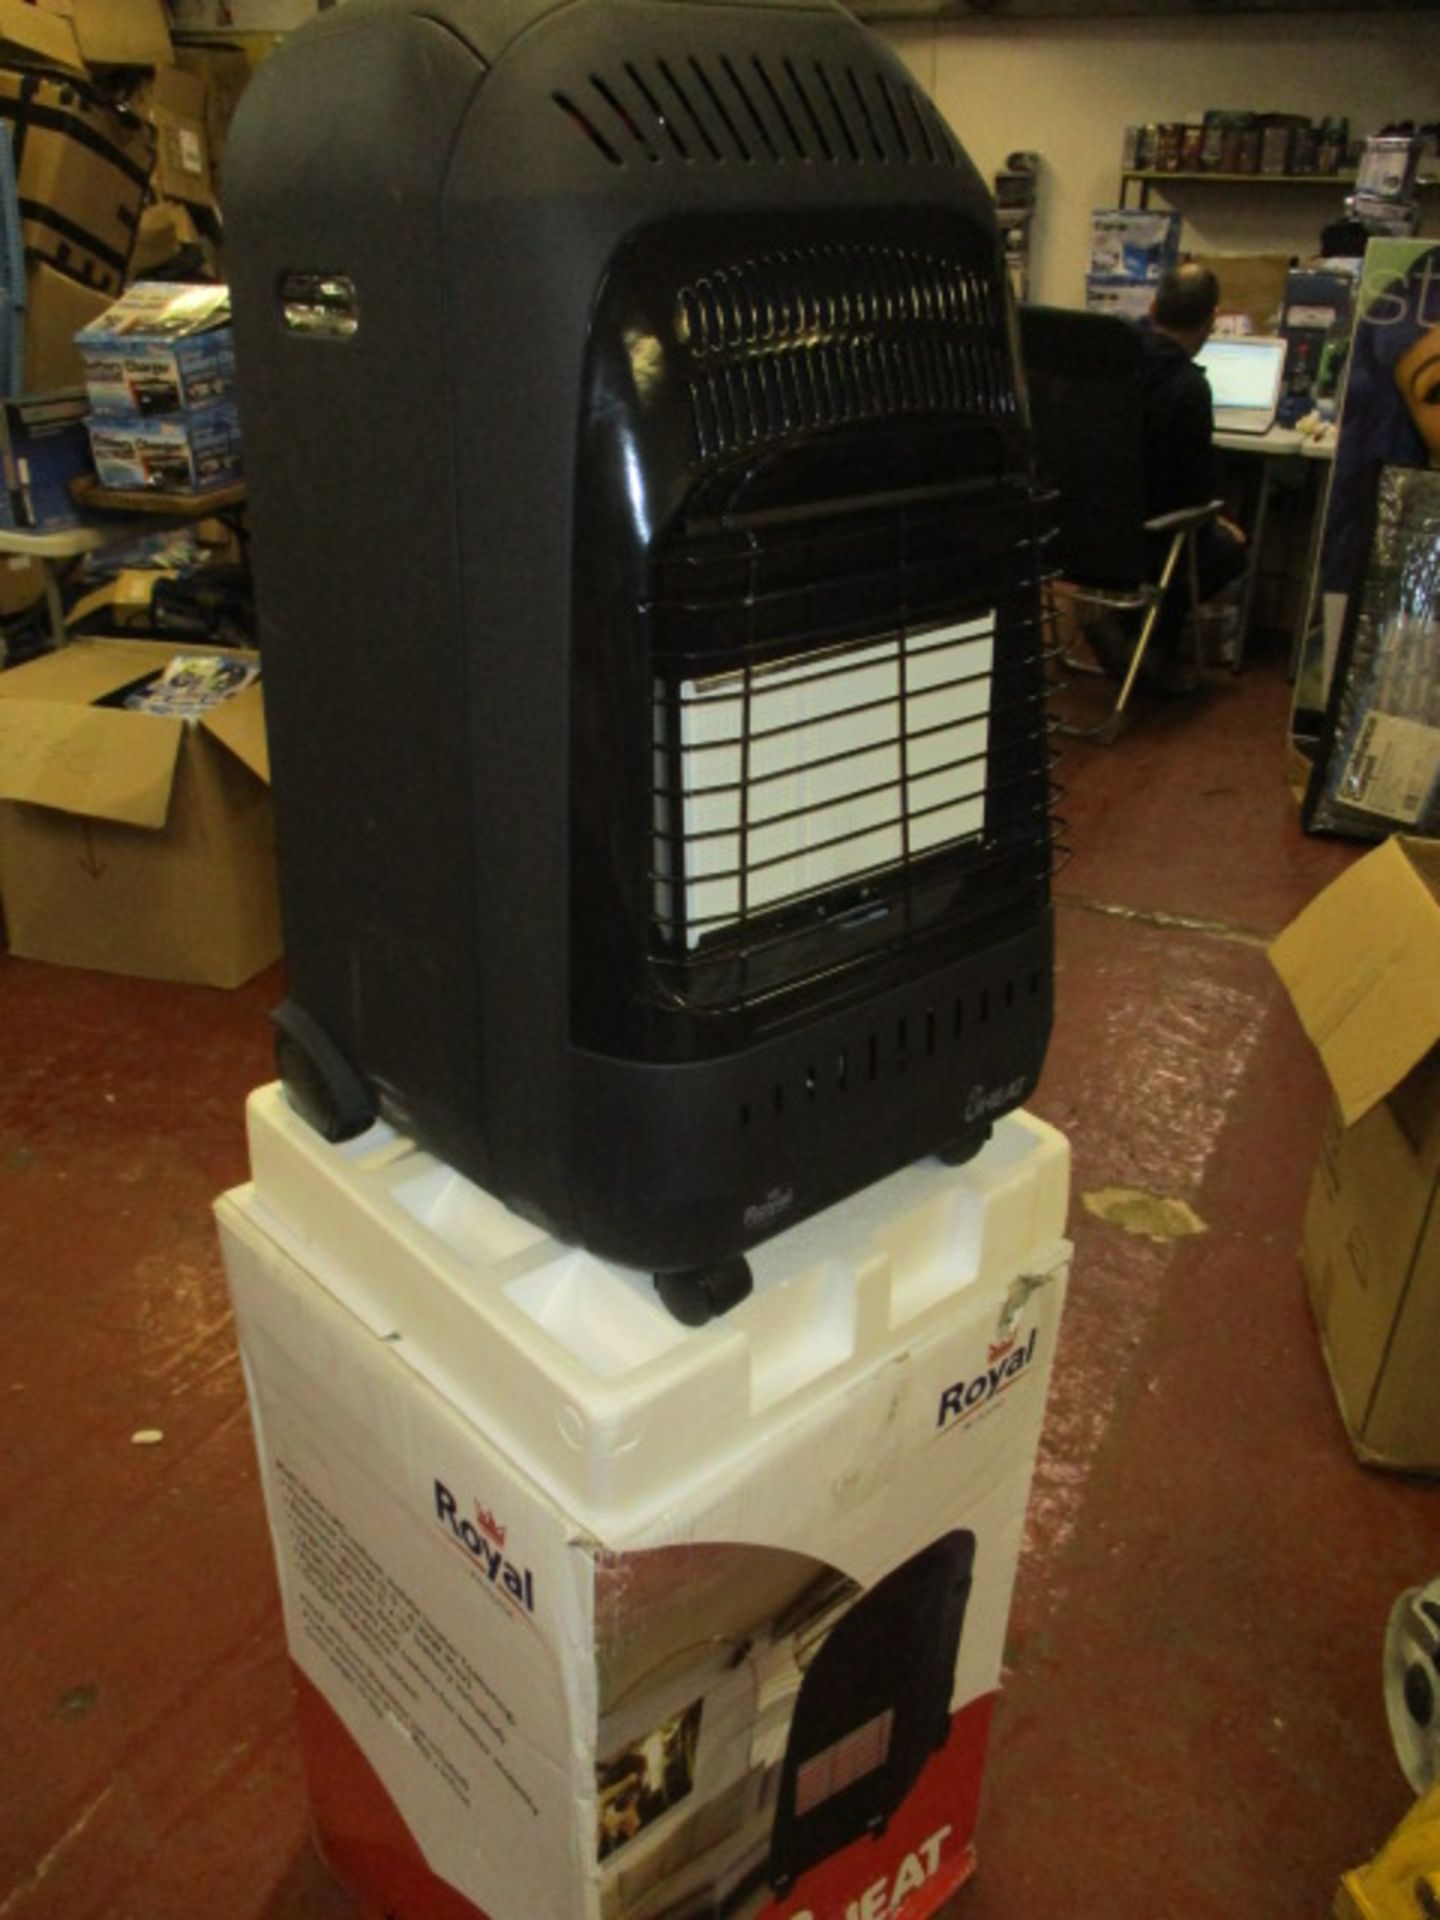 Royal At home Uheat gas heater boxed new unused RRP £139.99 - Image 2 of 2